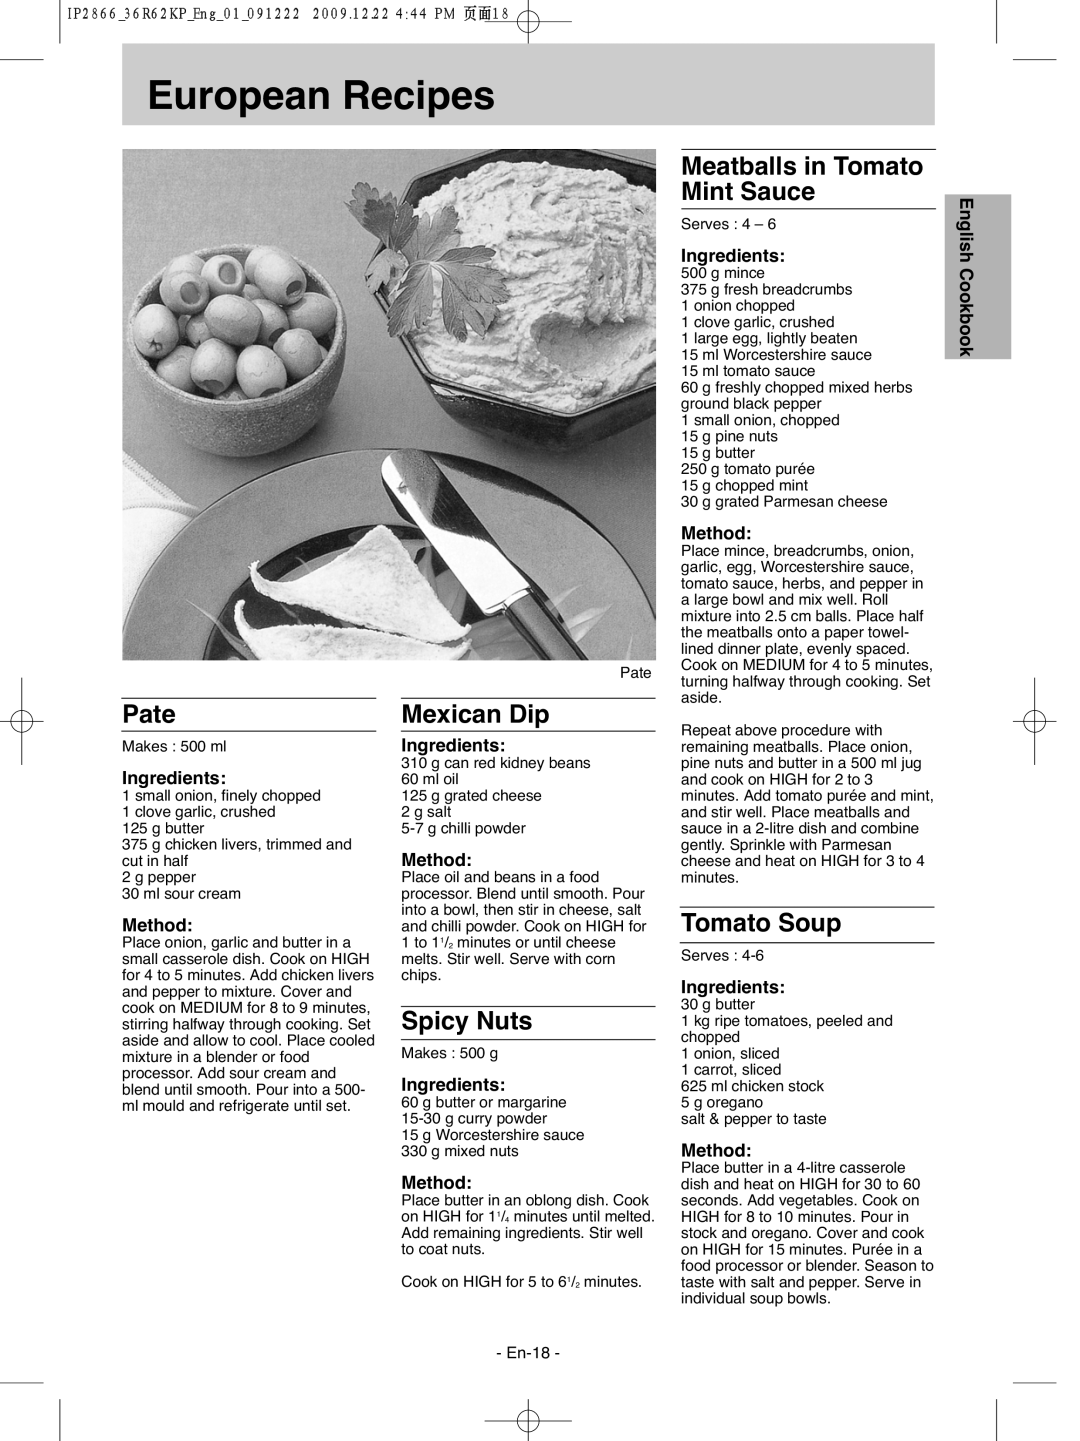 Panasonic NN-G335WF manual European Recipes, Pate, Mexican Dip, Spicy Nuts, Meatballs in Tomato Mint Sauce, Tomato Soup 